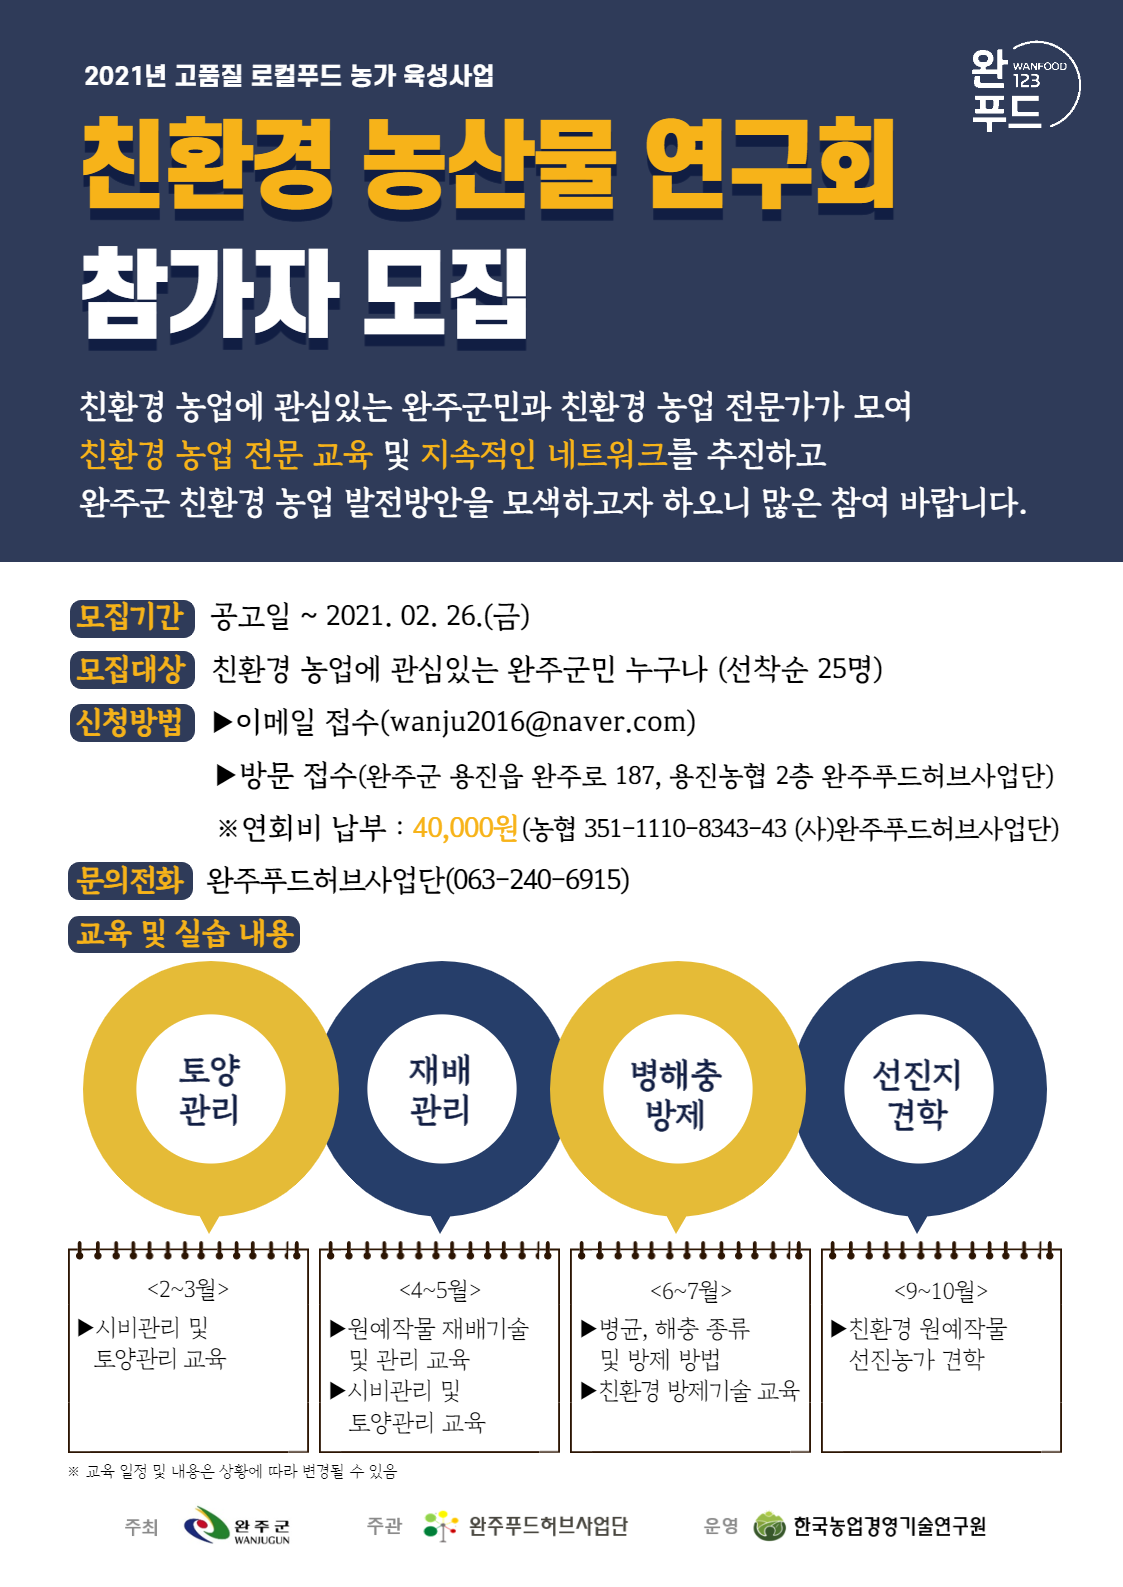 &#52828;&#54872;&#44221;&#45453;&#49328;&#47932;&#50672;&#44396;&#54924;&#47784;&#51665;&#50504;&#45236;(&#54252;&#49828;&#53552;).png